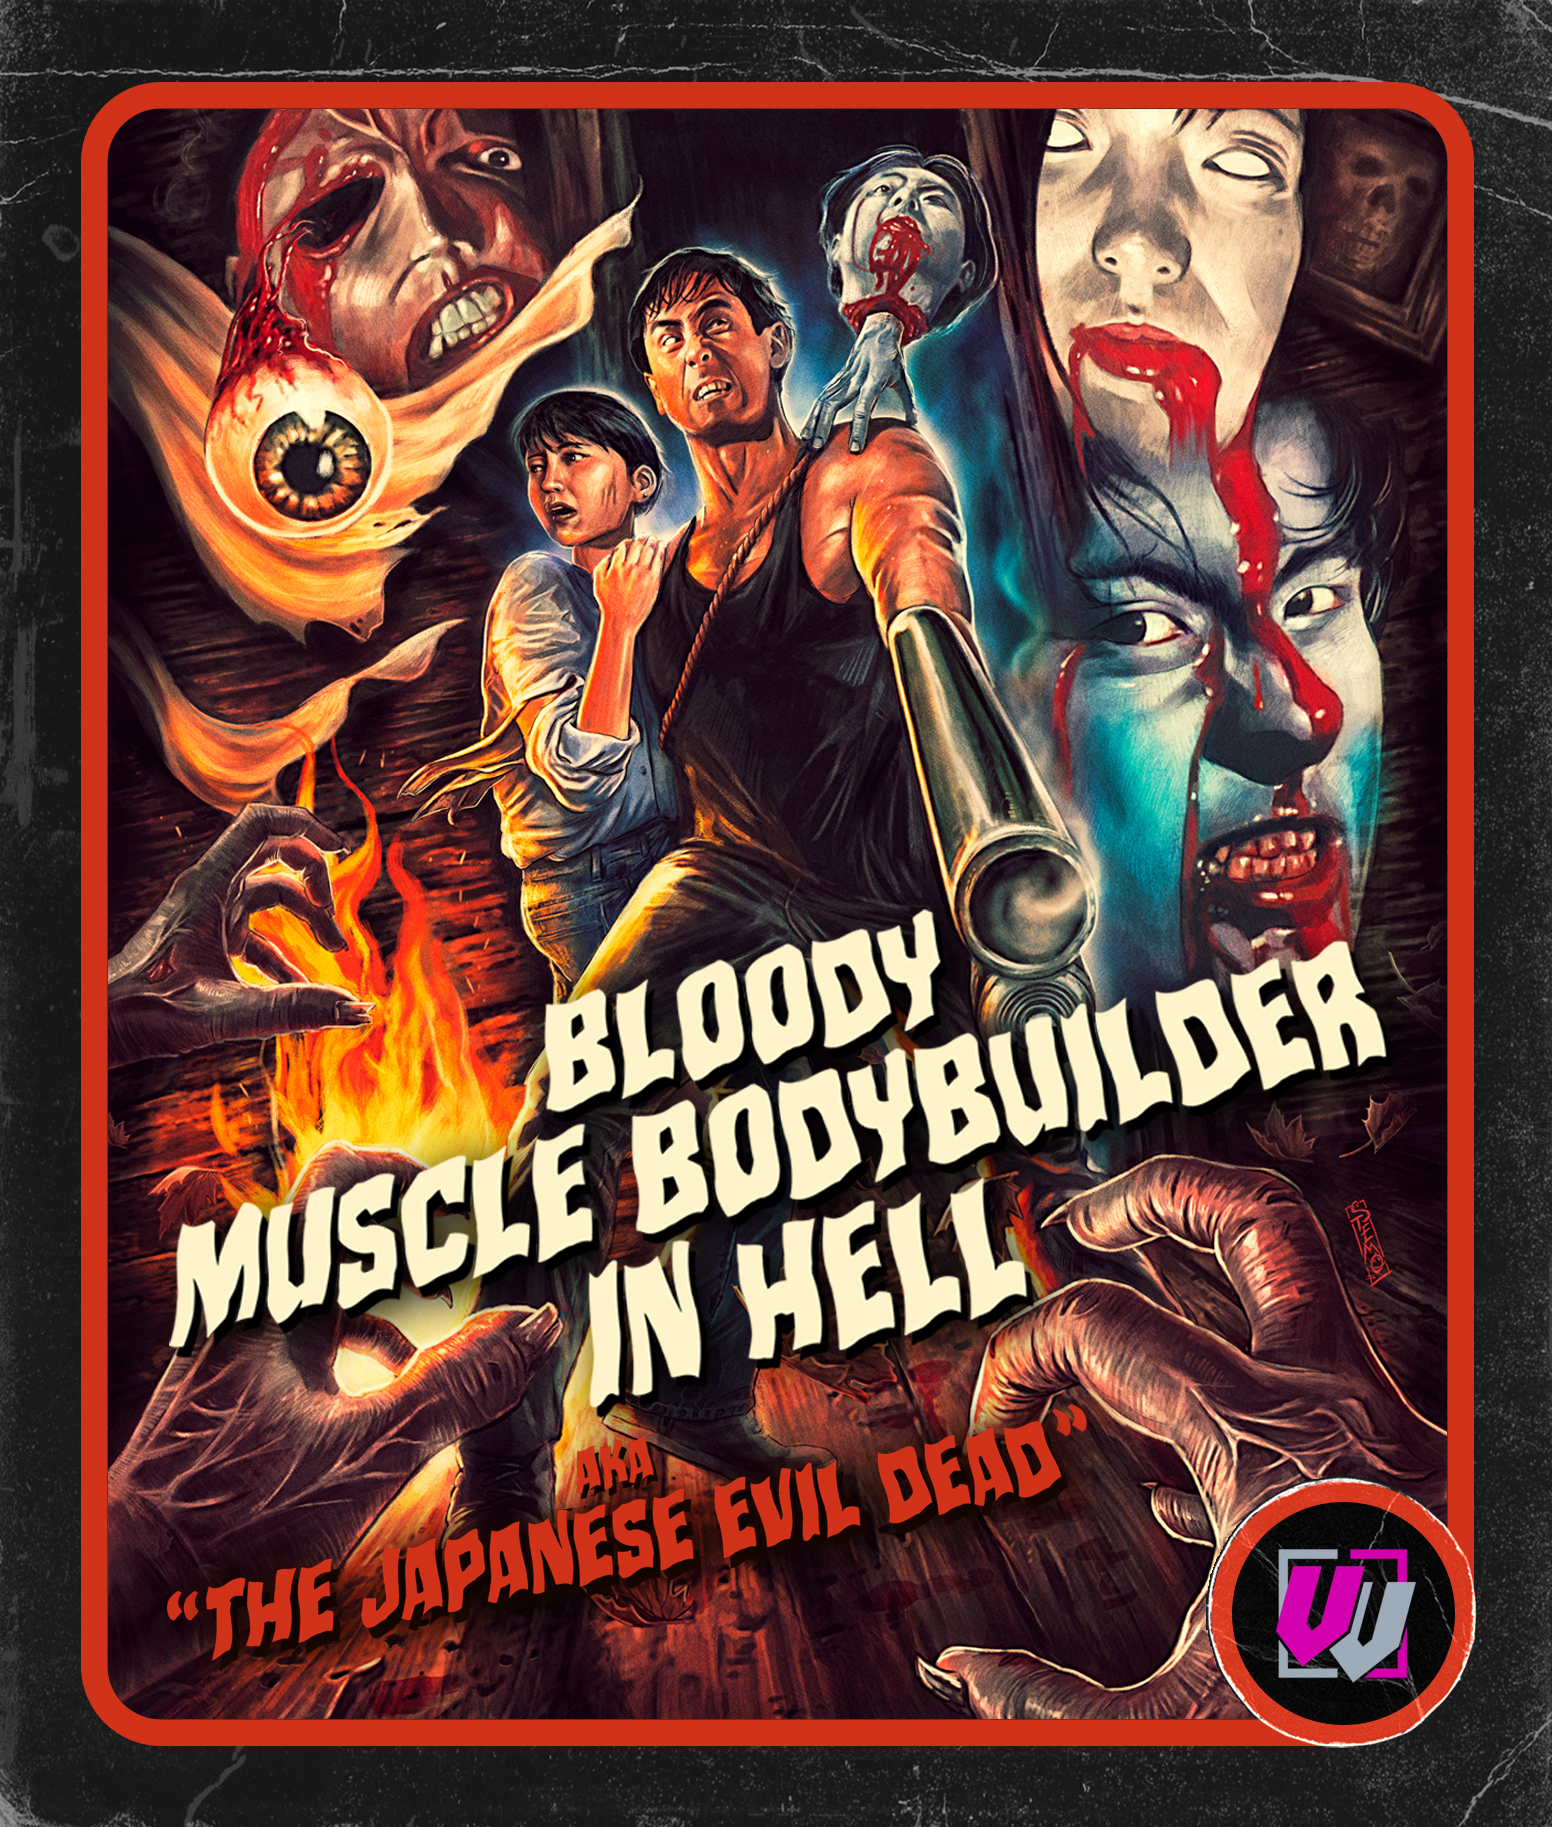 Bloody Muscle Bodybuilder in Hell - Collector’s Edition (1995)